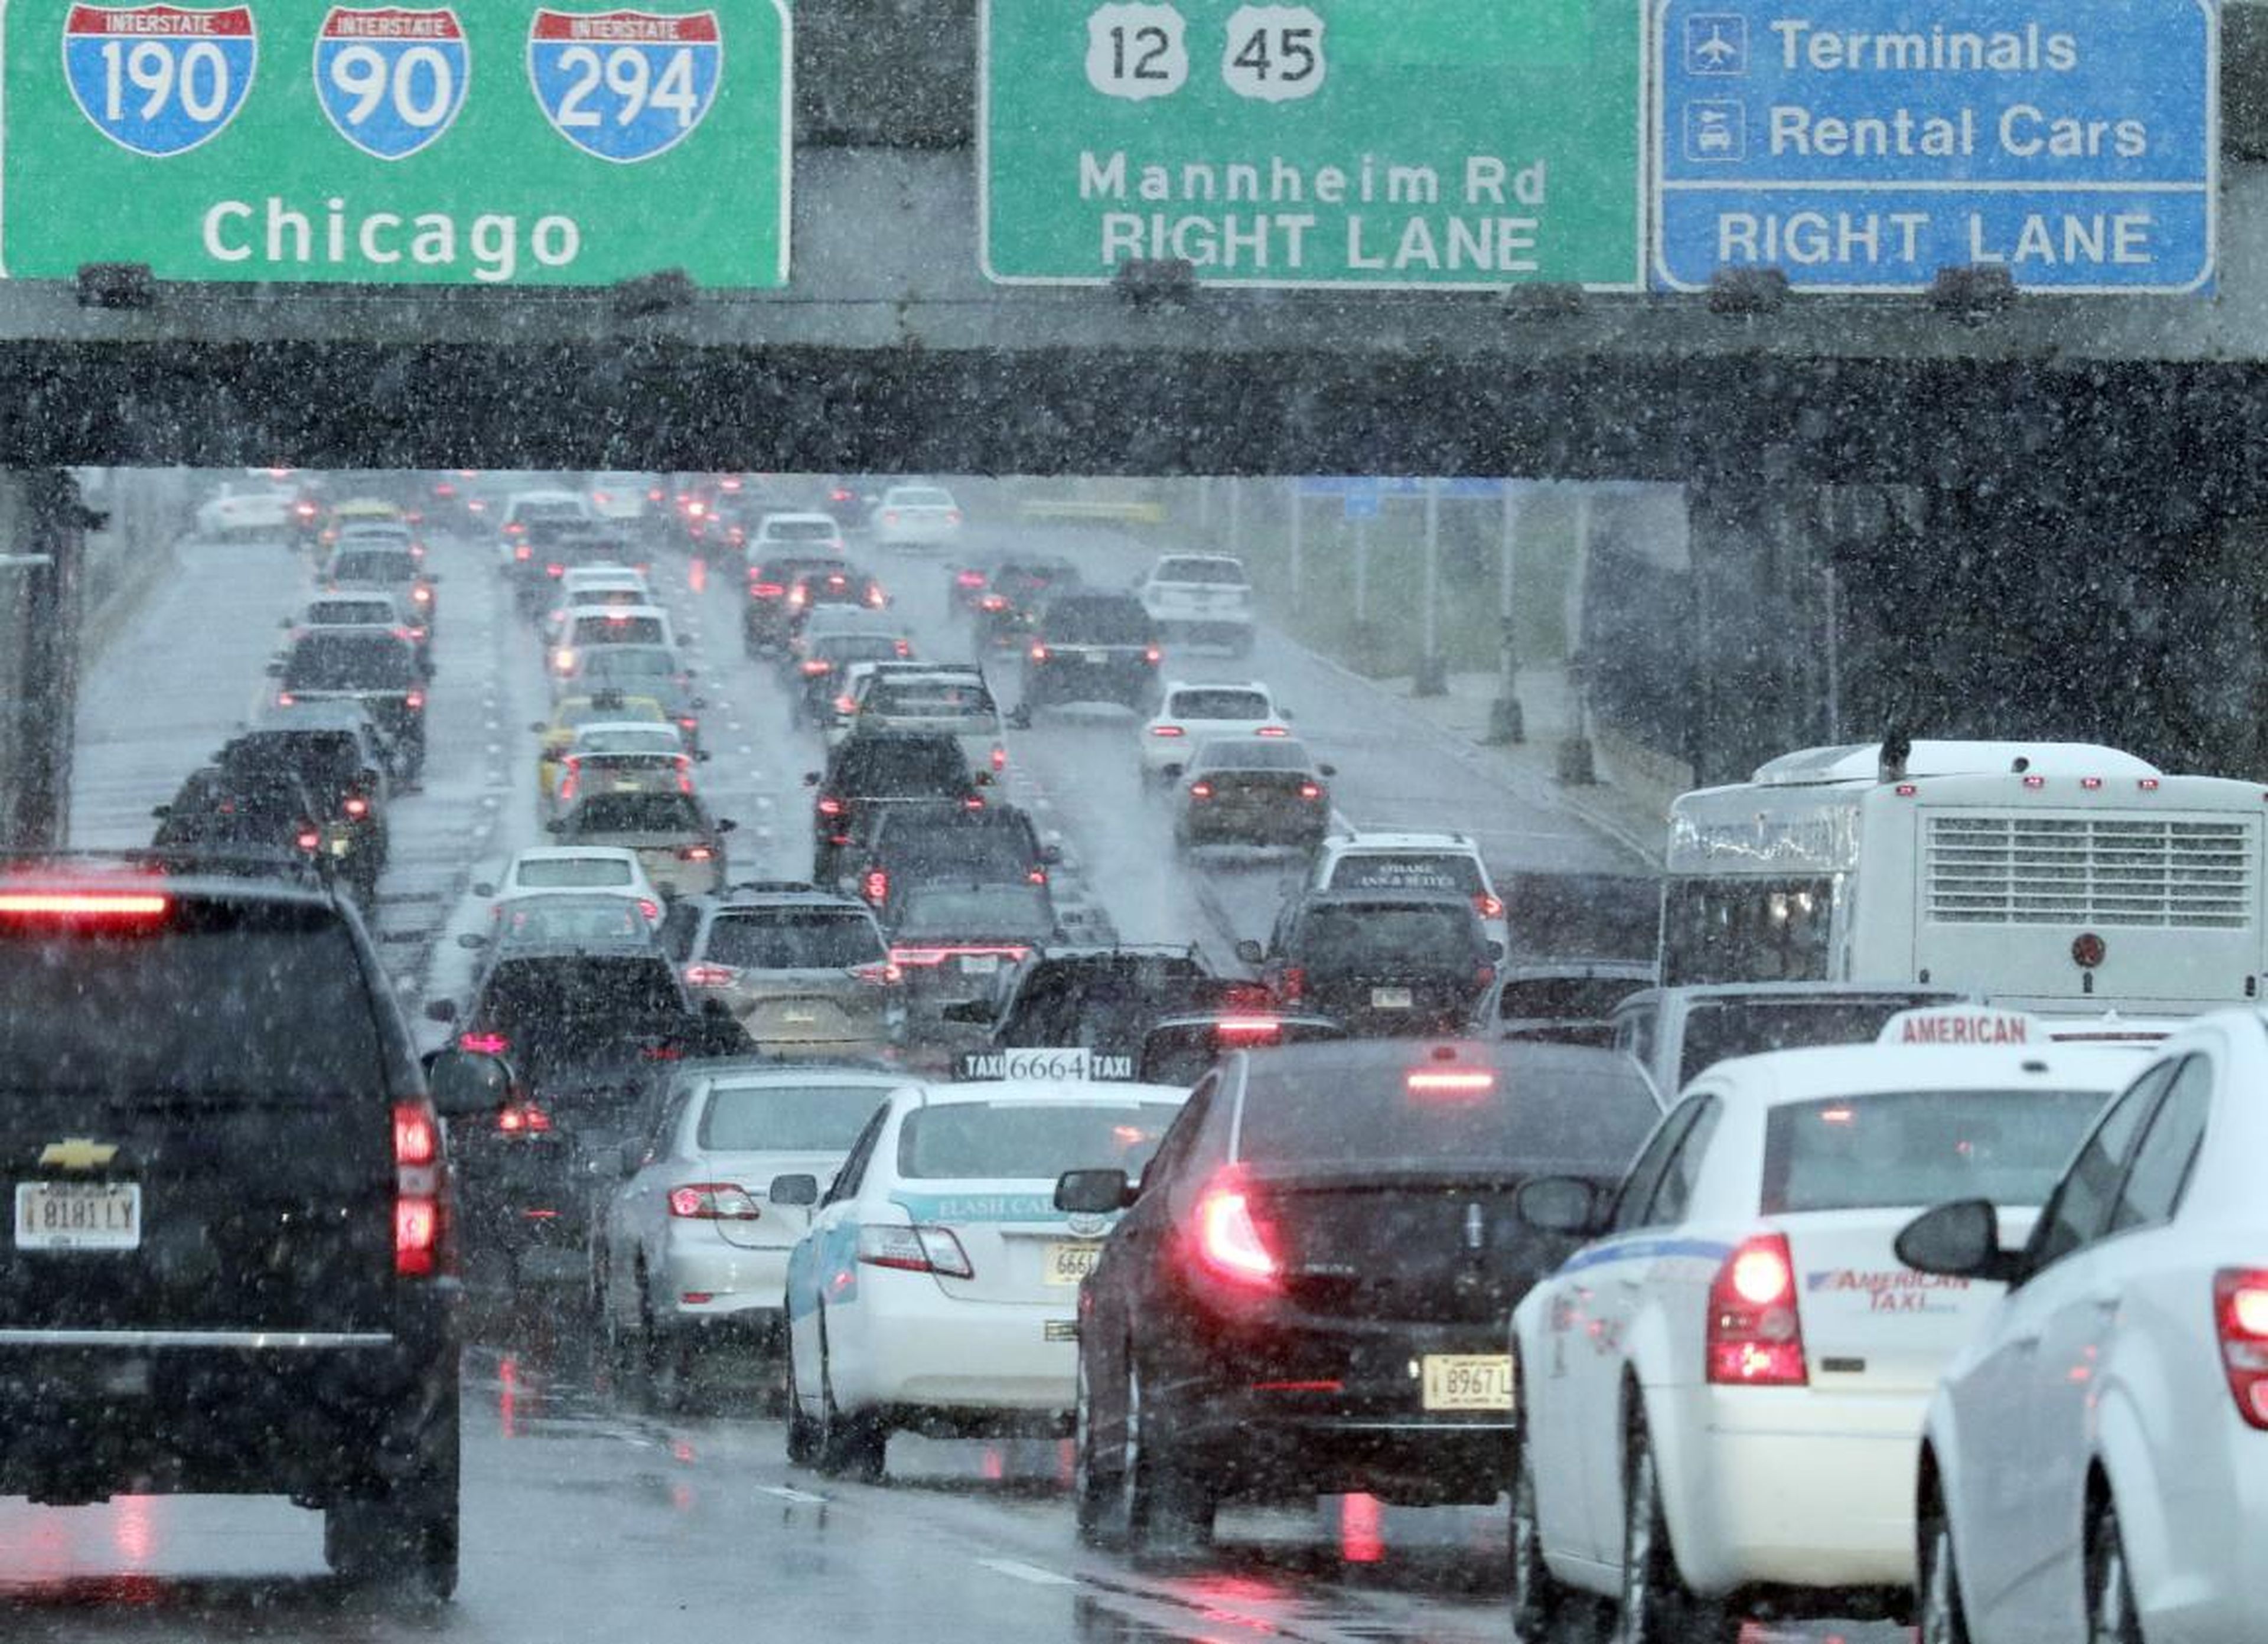 Just imagine the misery of being caught in a Chicago traffic jam in winter.